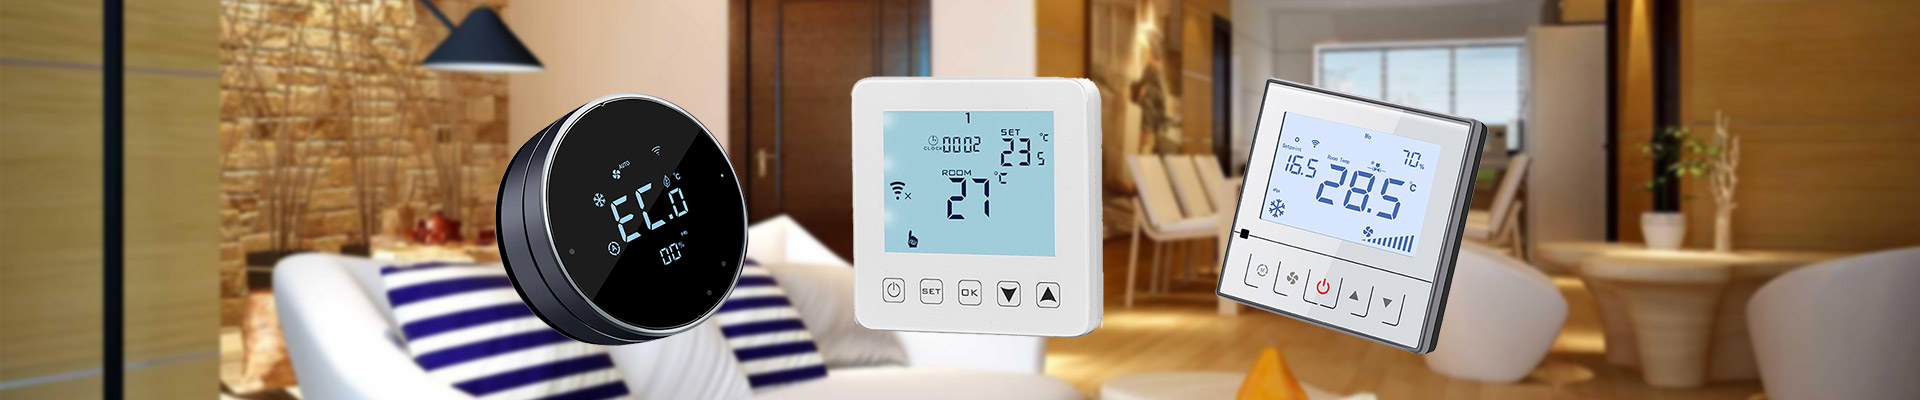 FC610 Luxury Wi-Fi Touch Screen Thermostat of FCU